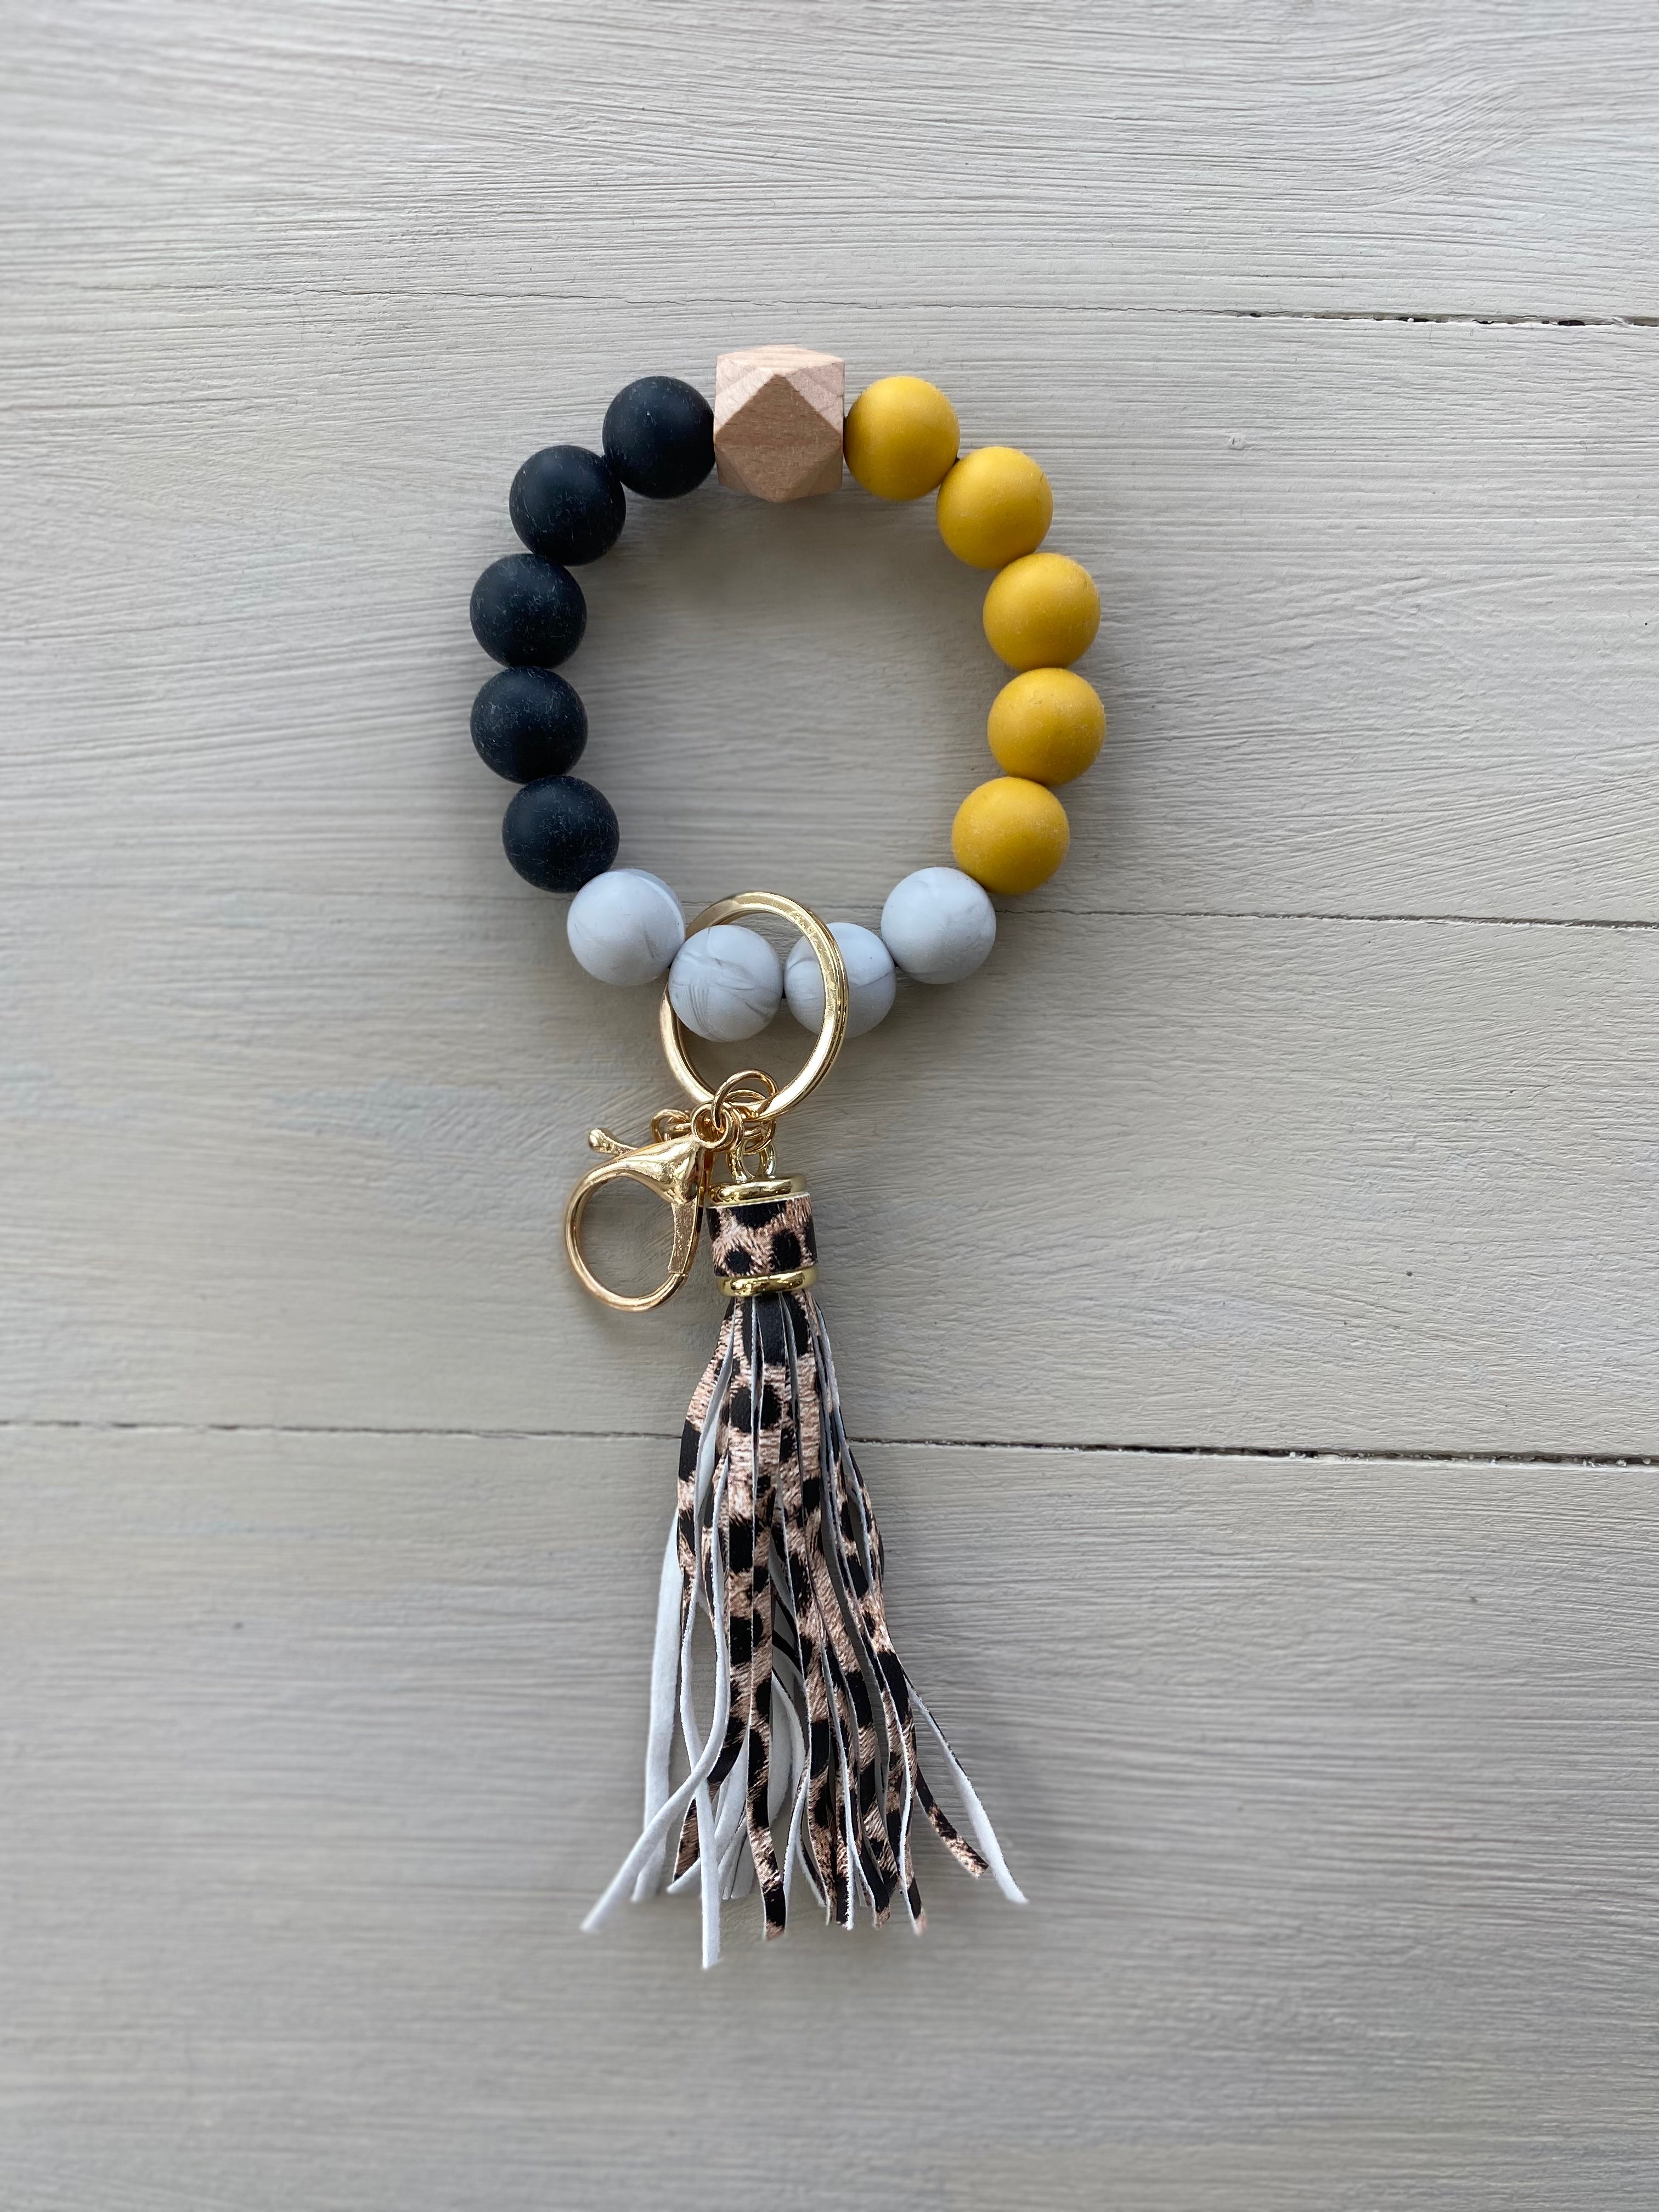 SVF Black and White Grey Marble Silicone Wristlet Beaded Key Chain Bracelet with Tassel and Motivational Engraved Acrylic Charm of choice! (Copy) The Mustard Seed Collection, The Seed